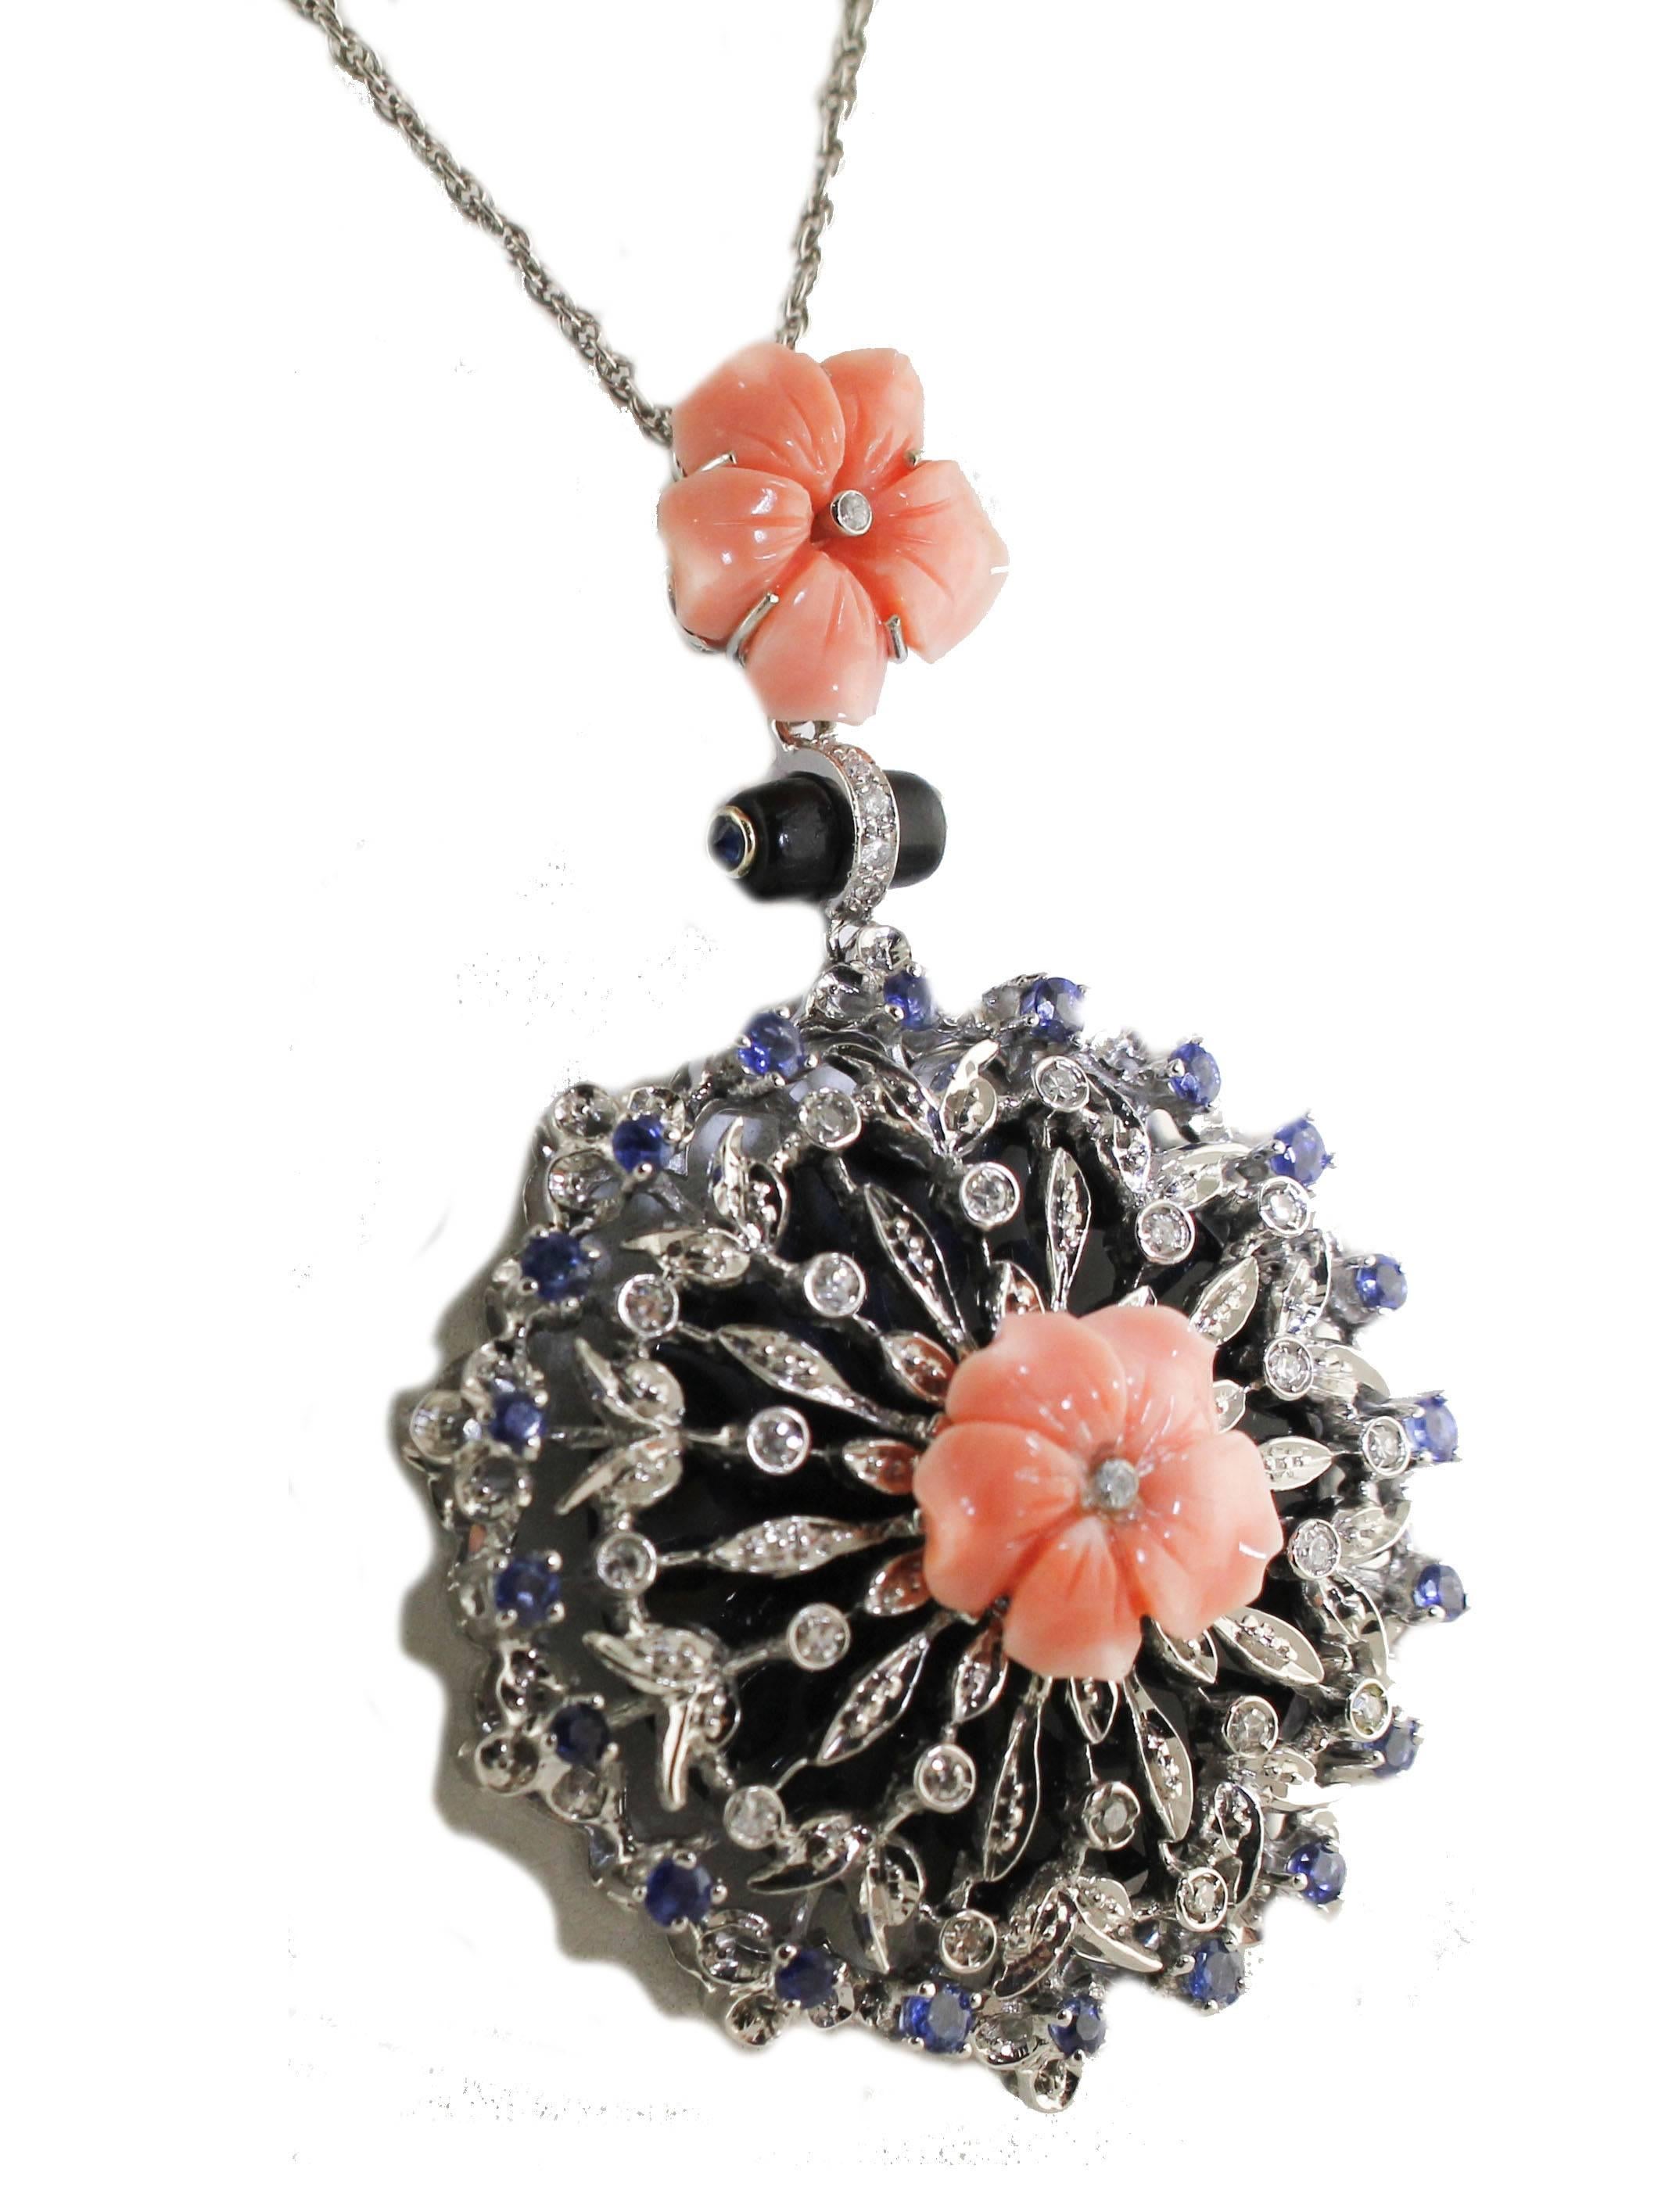 Fantastic pendant in 14kt white gold, studded with diamonds 0.16 ct, and sapphires ct 1.55, with two beautiful pink coral flowers 1.40 grams and onyx 2.70 grams. Gold-plated silver chain, as a gift. Total weight gr 19.45.
Diamonds ct 0.16
Coral gr